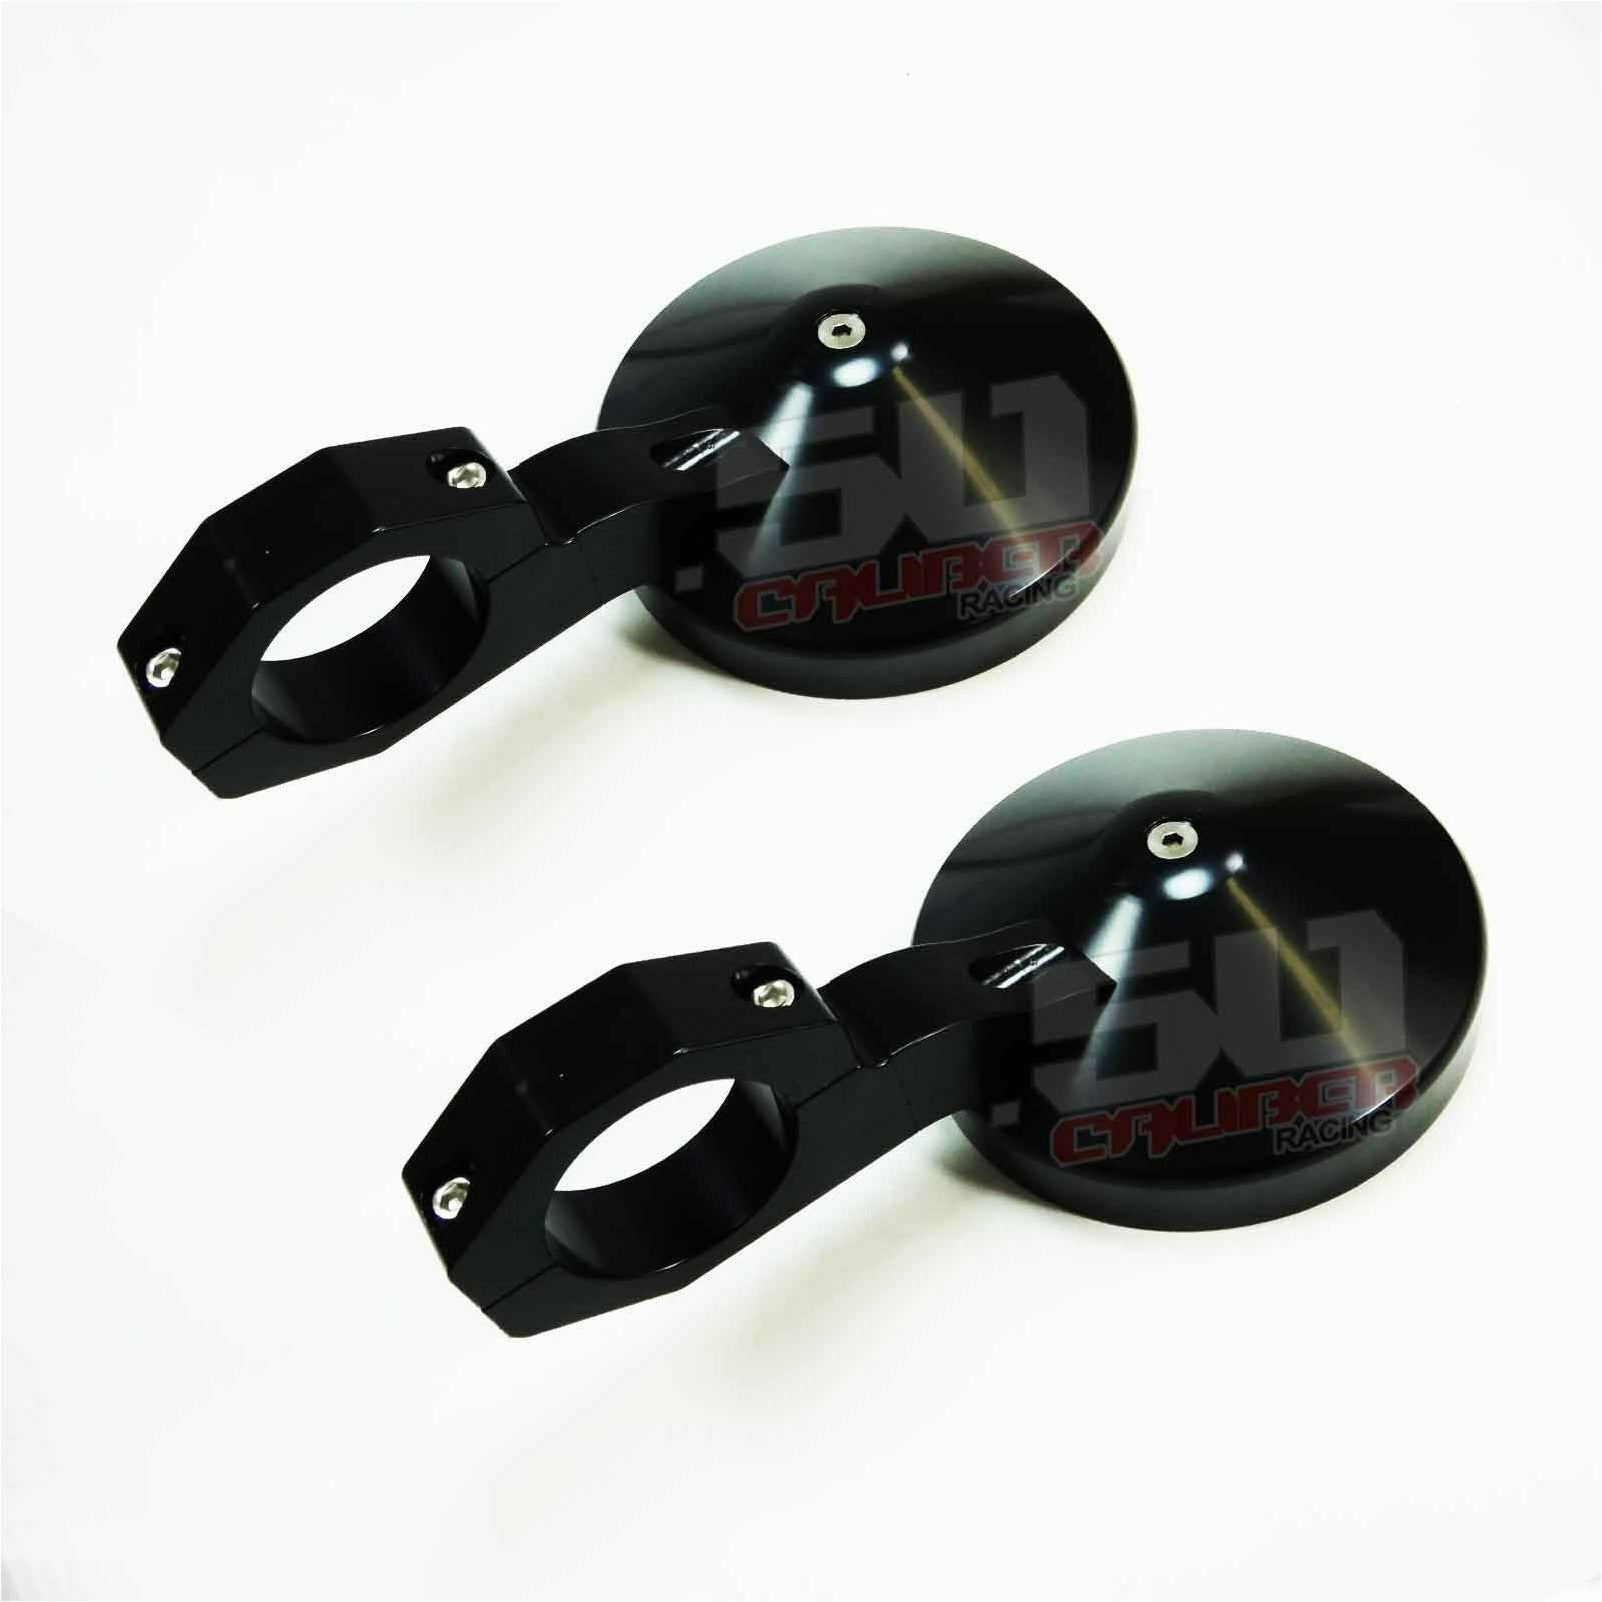 5" Round Mirrors with 2" Clamps